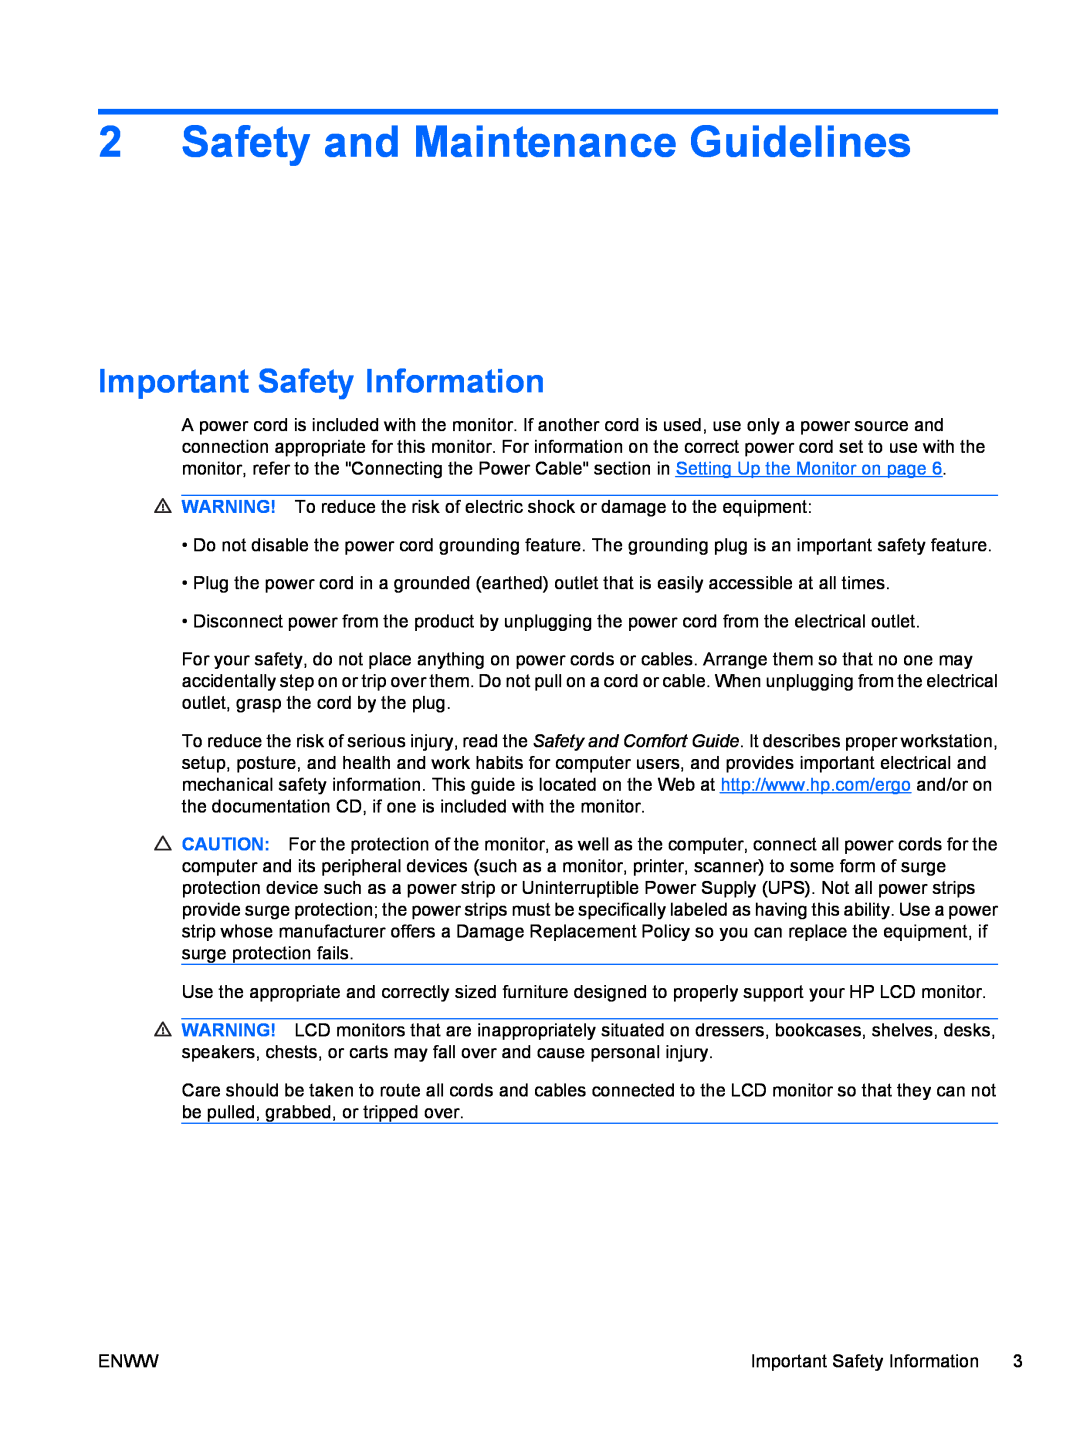 HP Q1910S, Q2210S, Q2010S manual Safety and Maintenance Guidelines, Important Safety Information 